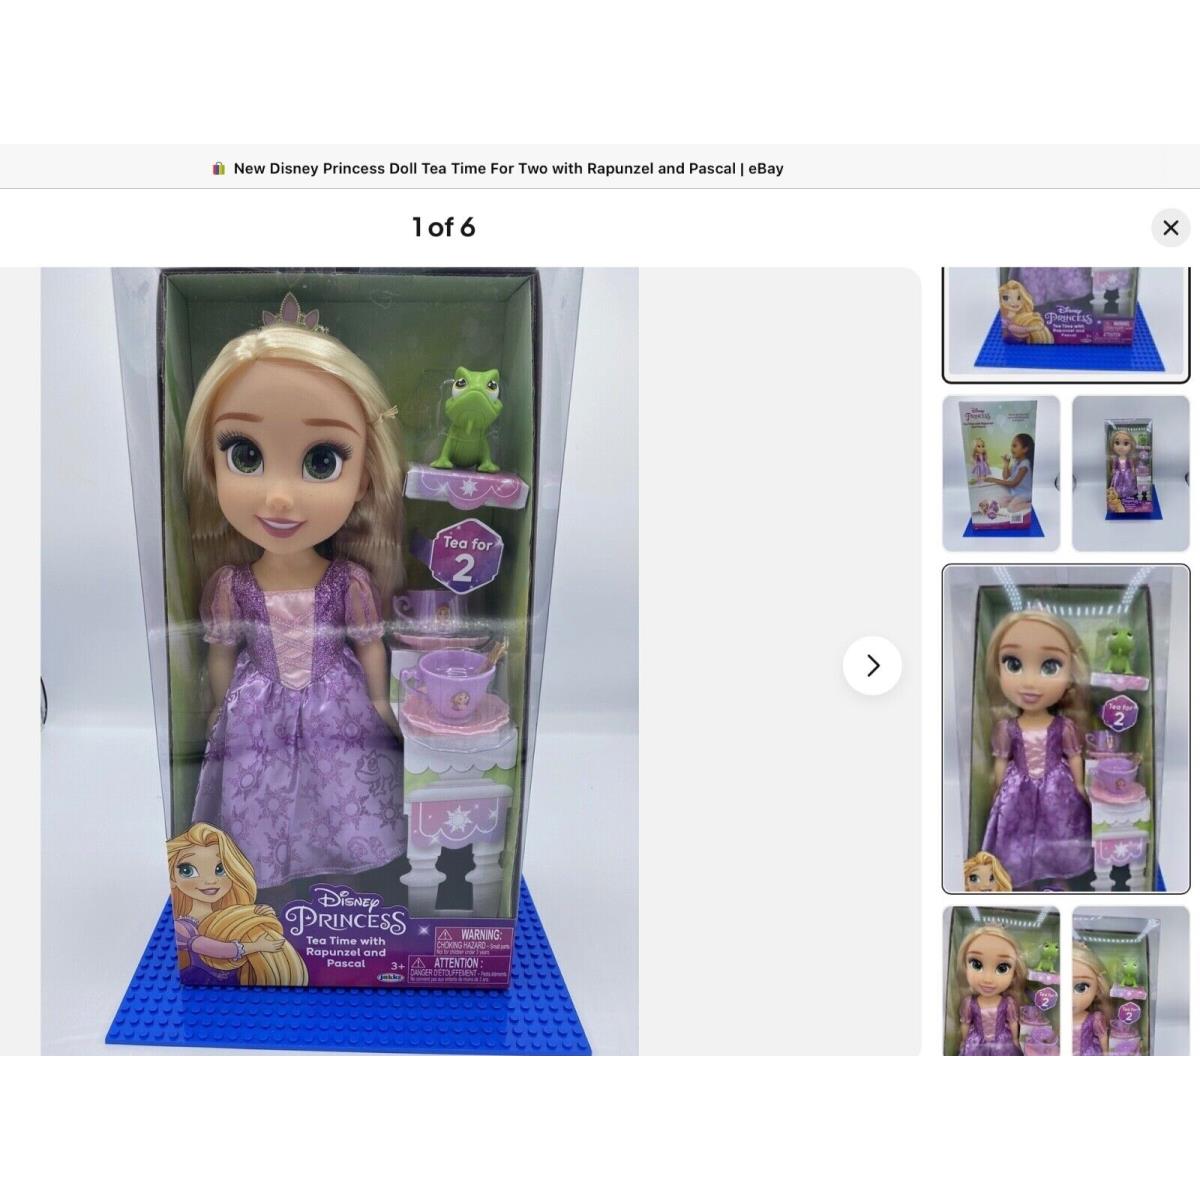 Disney Princess Tea Time For Two with 14 Inch Doll Pet - Pick Your Favorite Rapunzel & Pascal